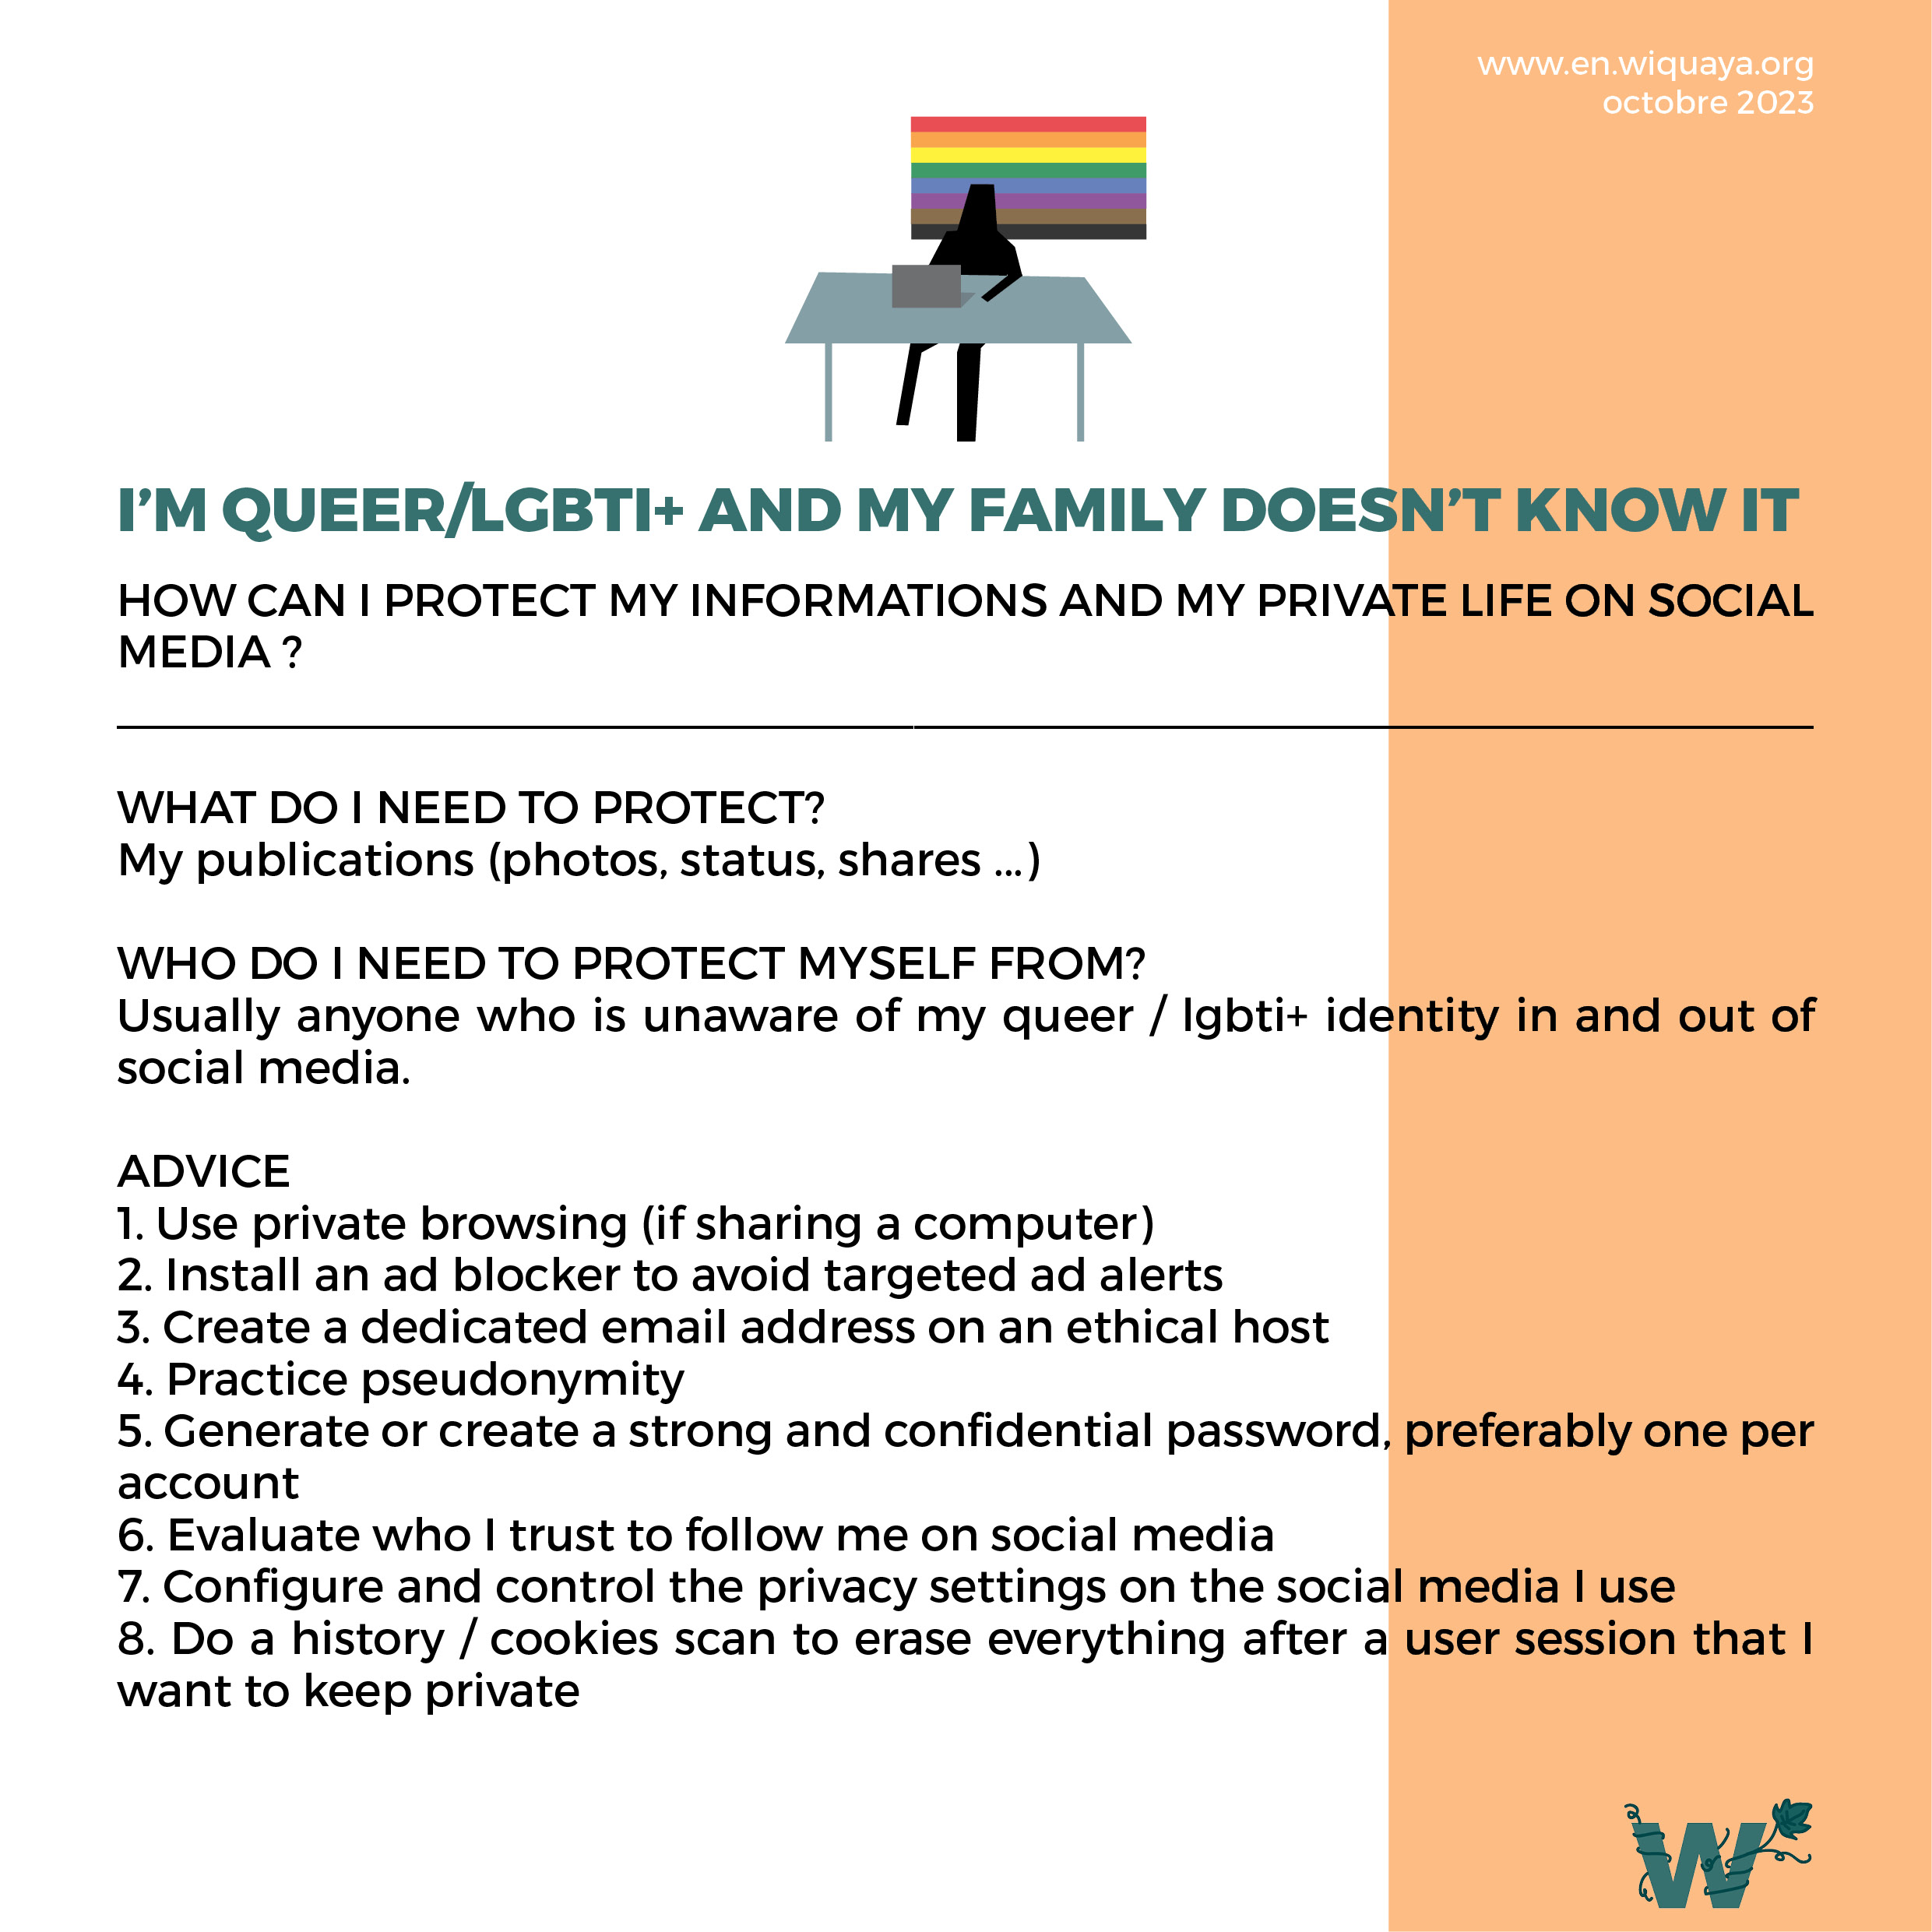 Help sheet I’m QUEER/LGBTI+ and my family doesn’t know it